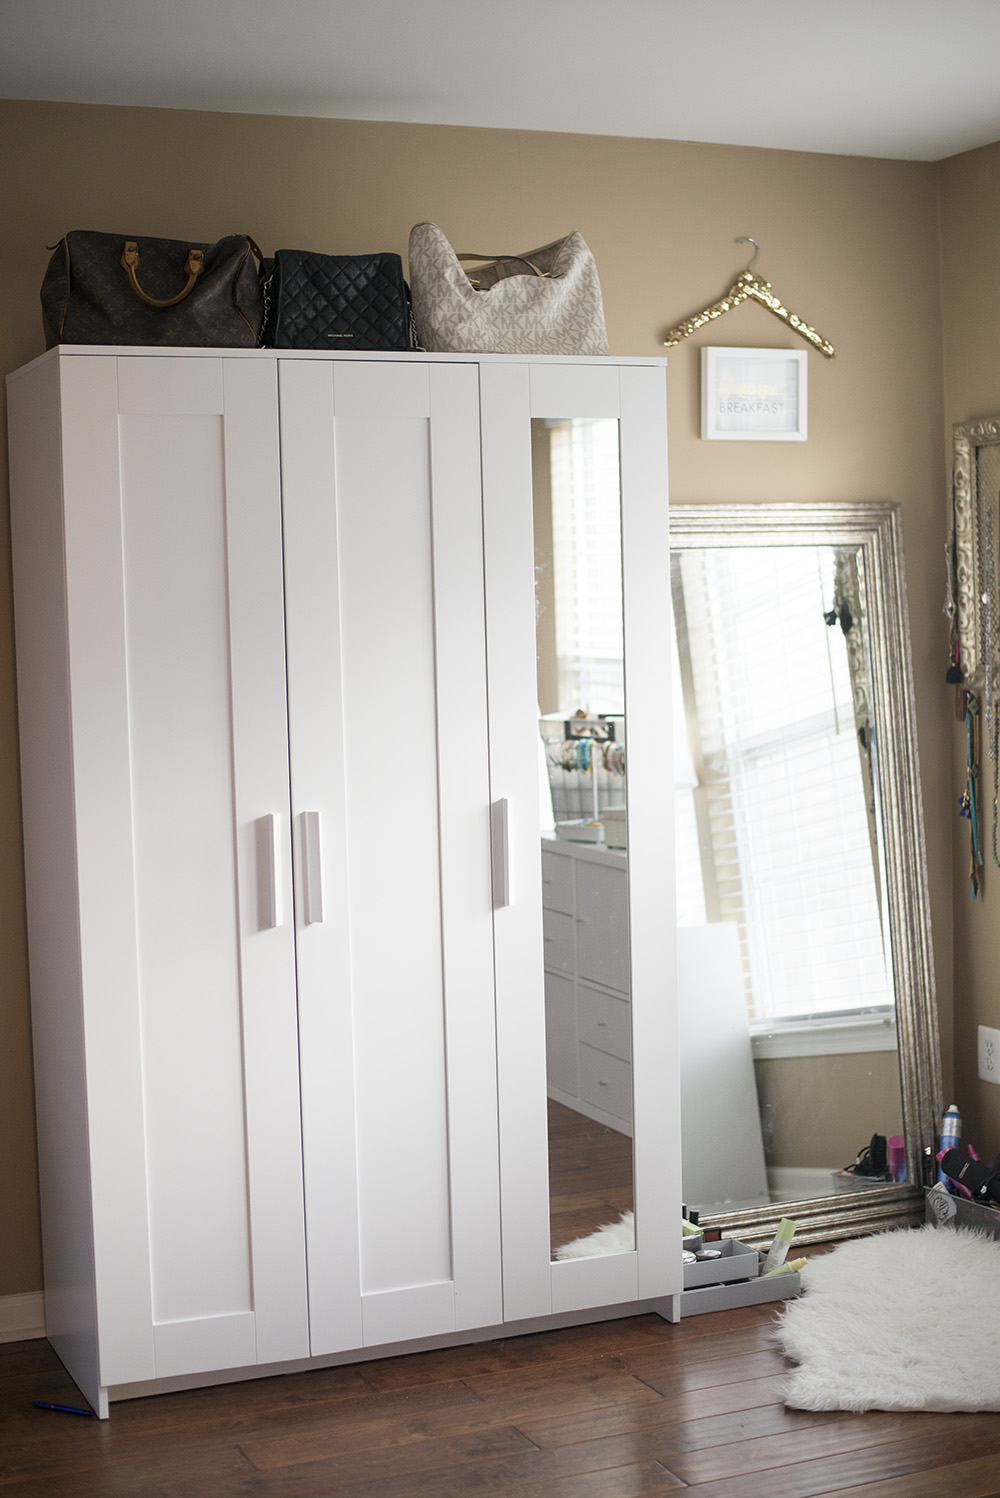 Life and style blogger, The Samantha Show is sharing her favorite IKEA hacks for a DIY closet room on a budget. A space all of your own!